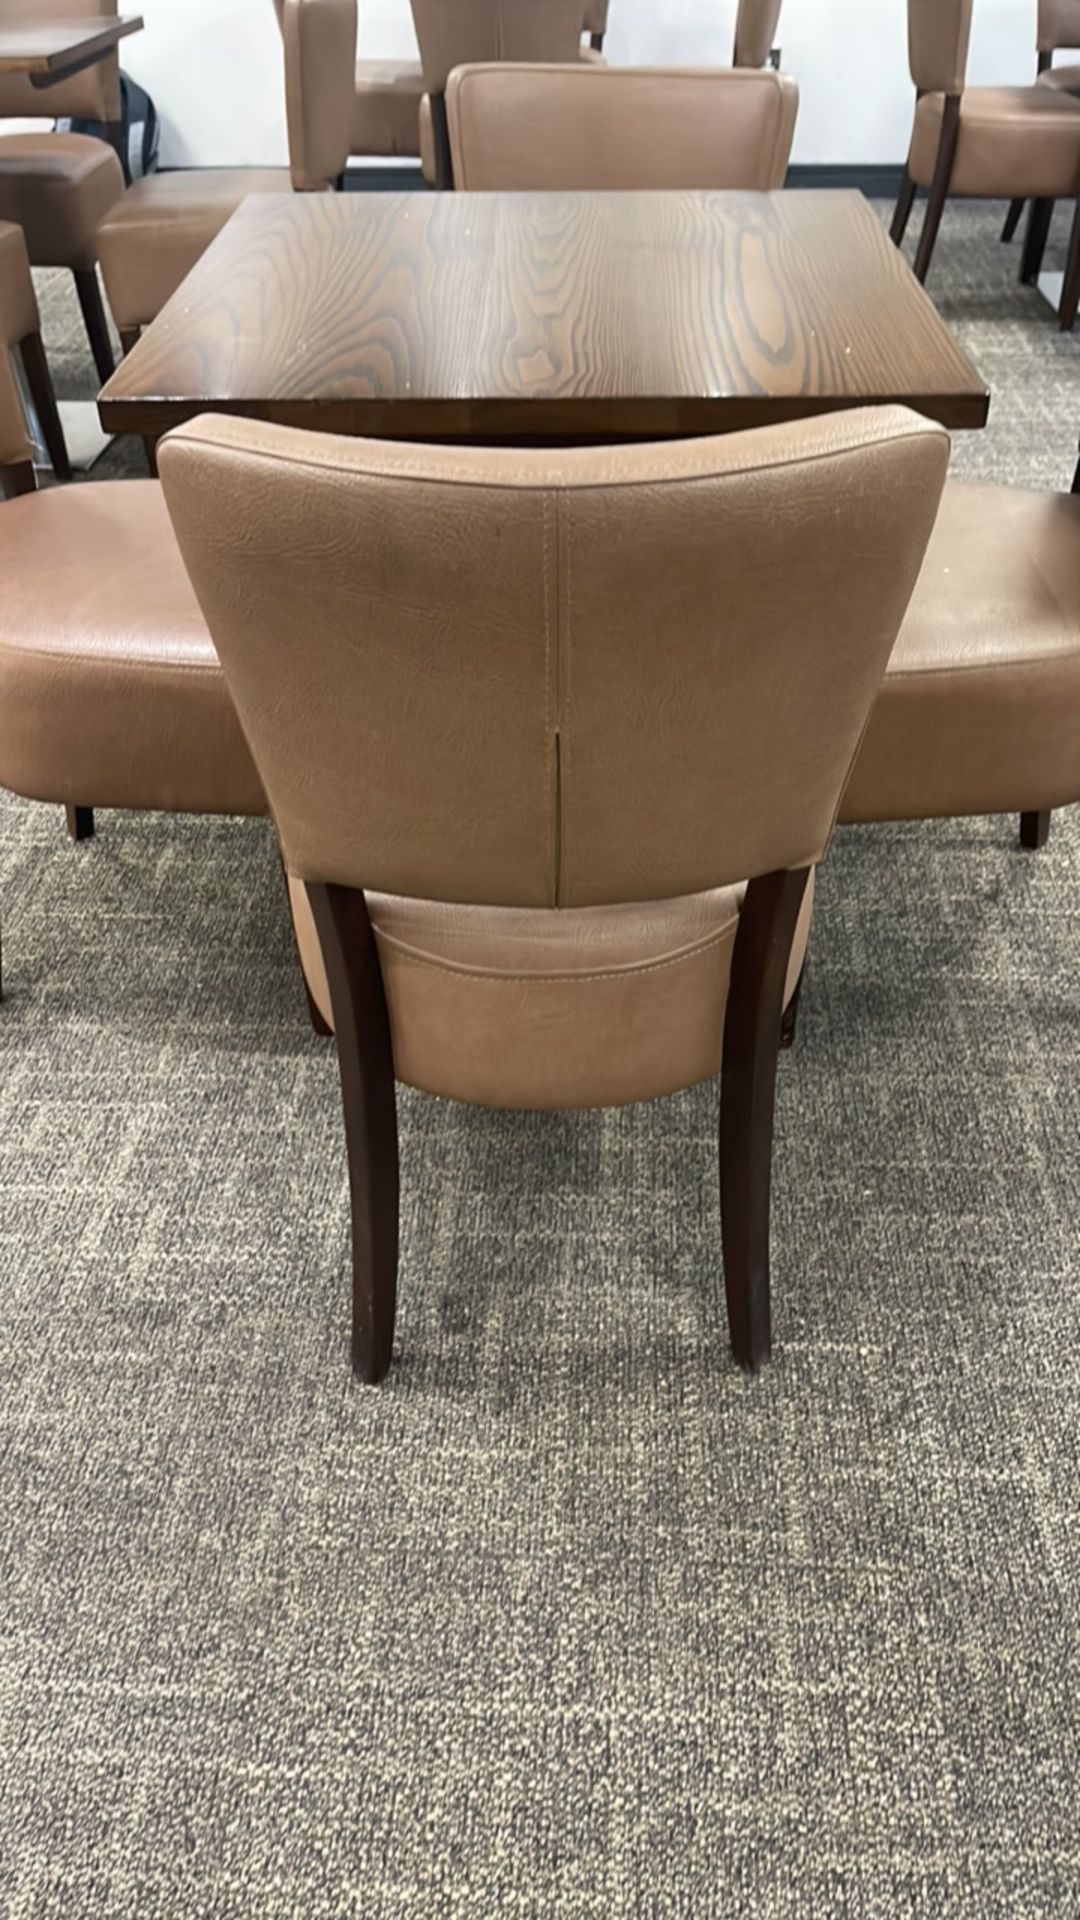 4 x Brown Leather Chairs and 1 x Square Table - Image 5 of 6